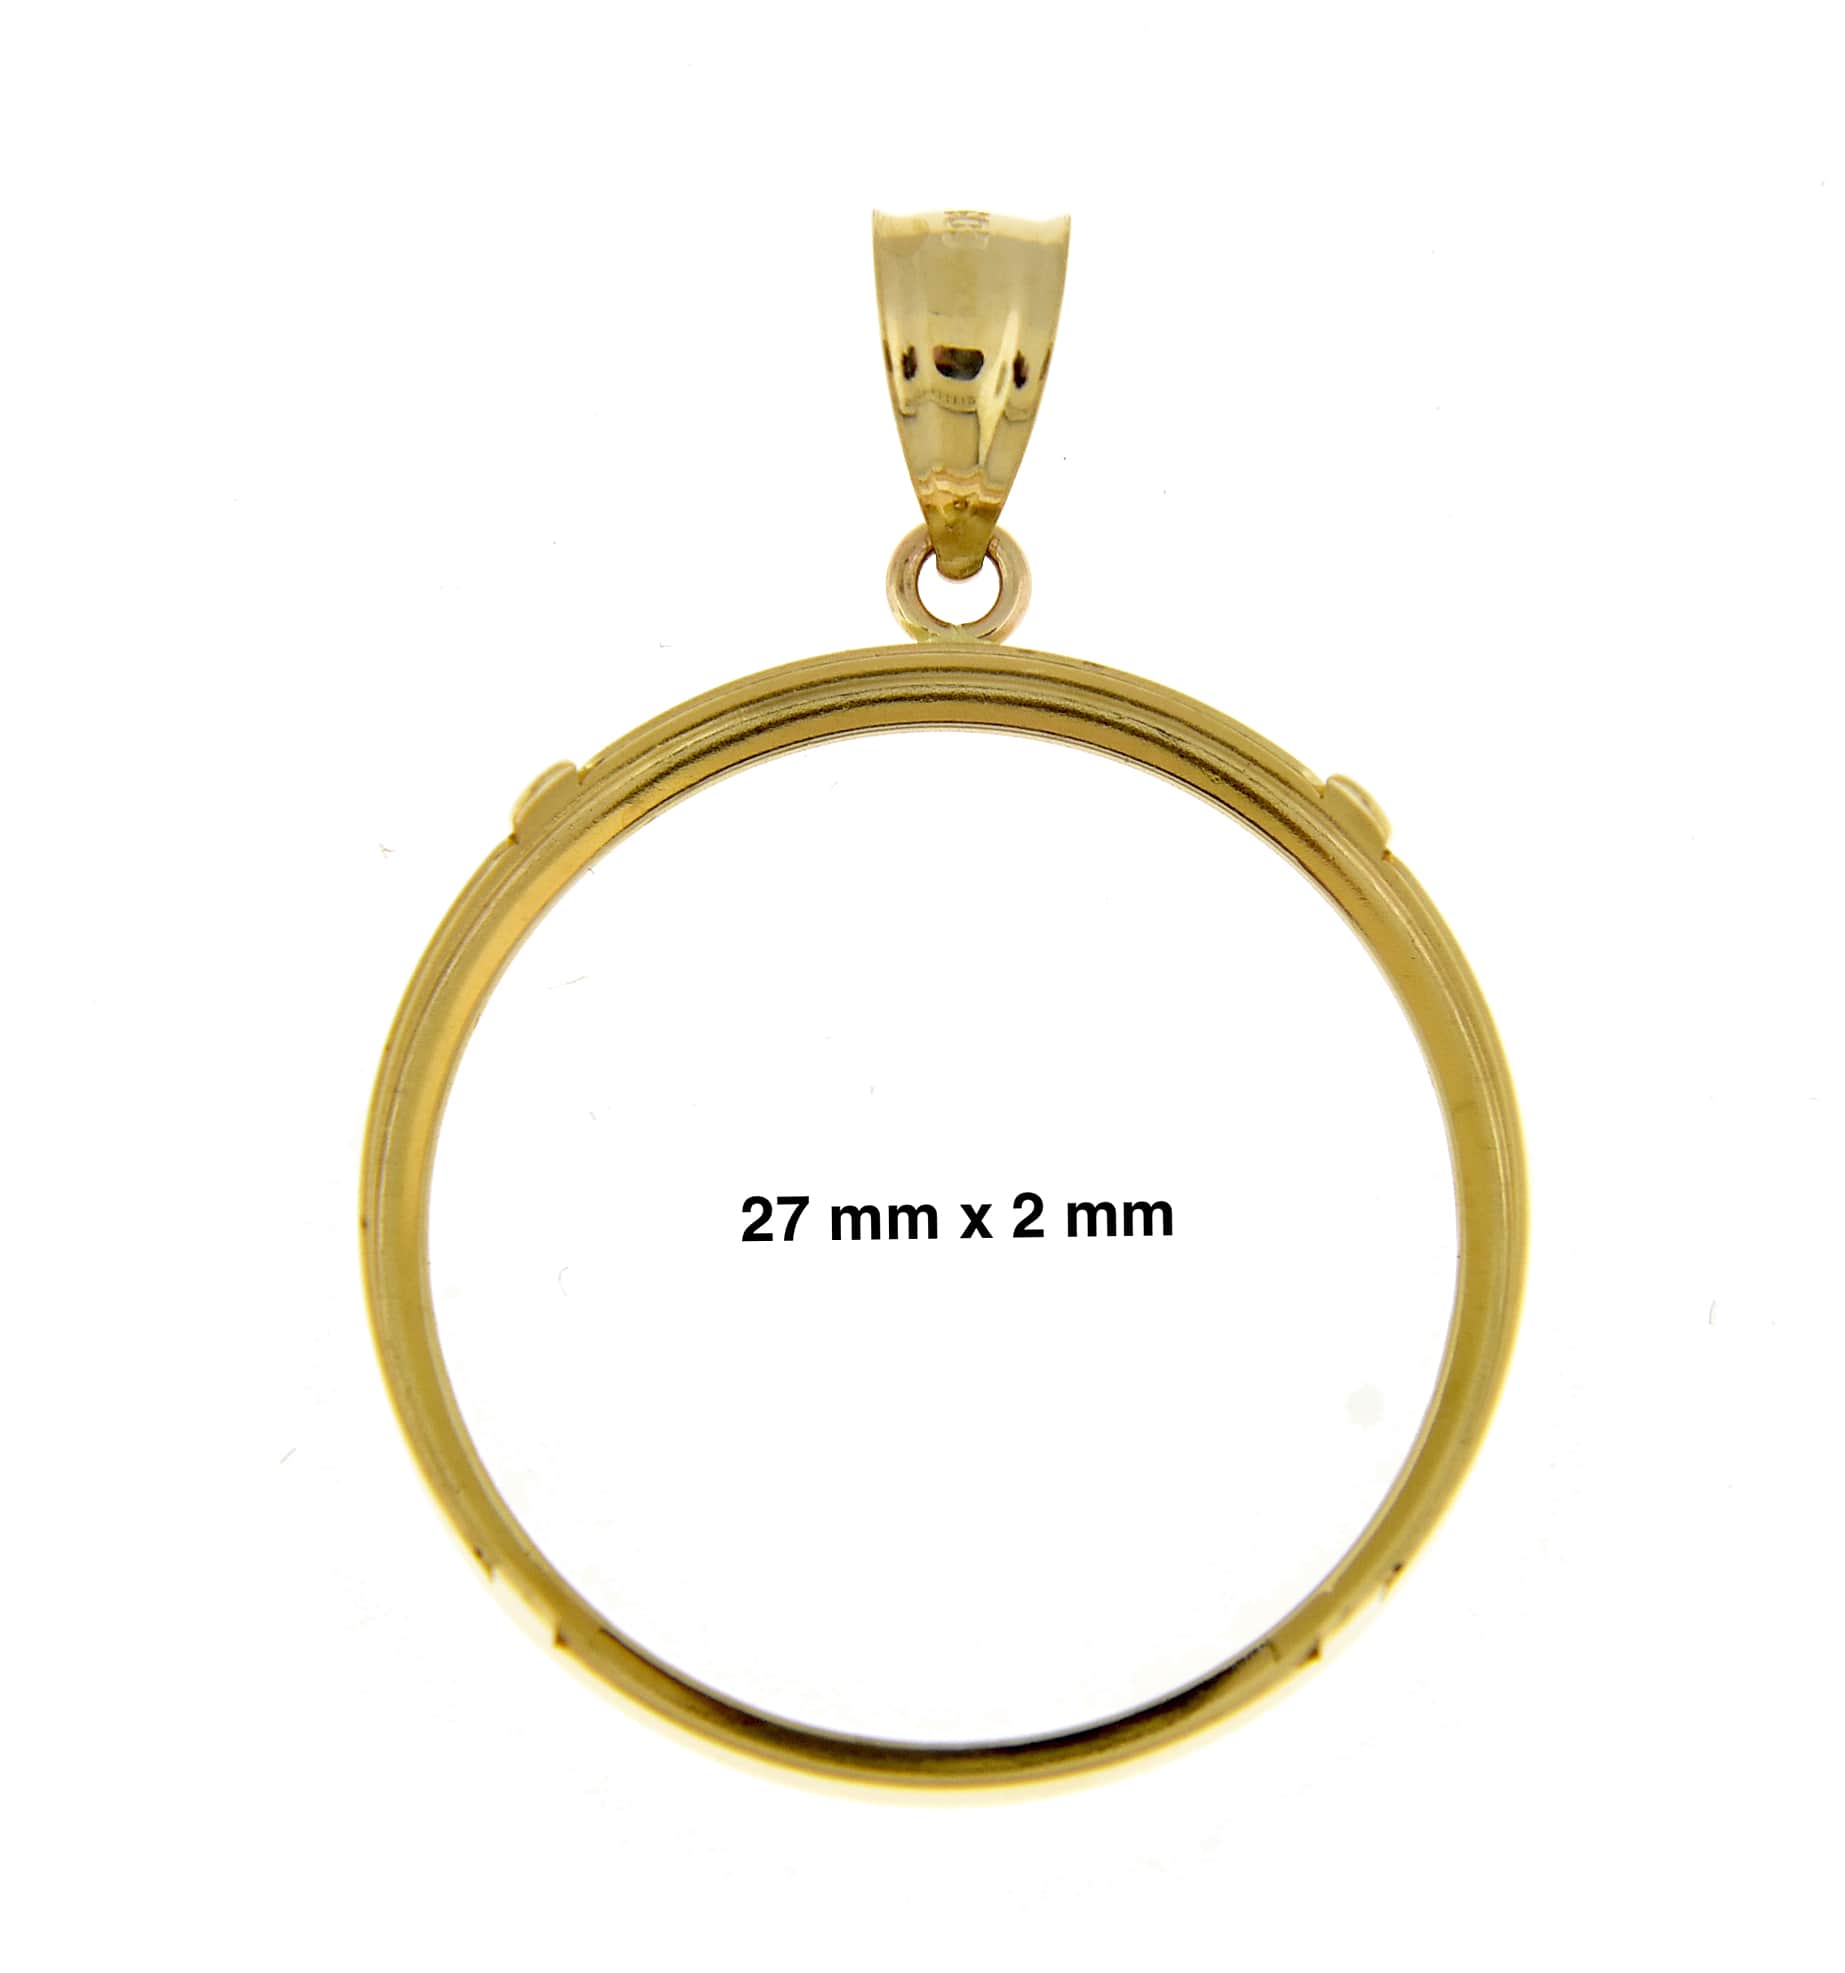 14K Yellow Gold United States US $10 Dollar or 1/2 oz ounce Chinese Panda Coin Holder Holds 27mm x 2mm Coins Tab Back Frame Pendant Charm